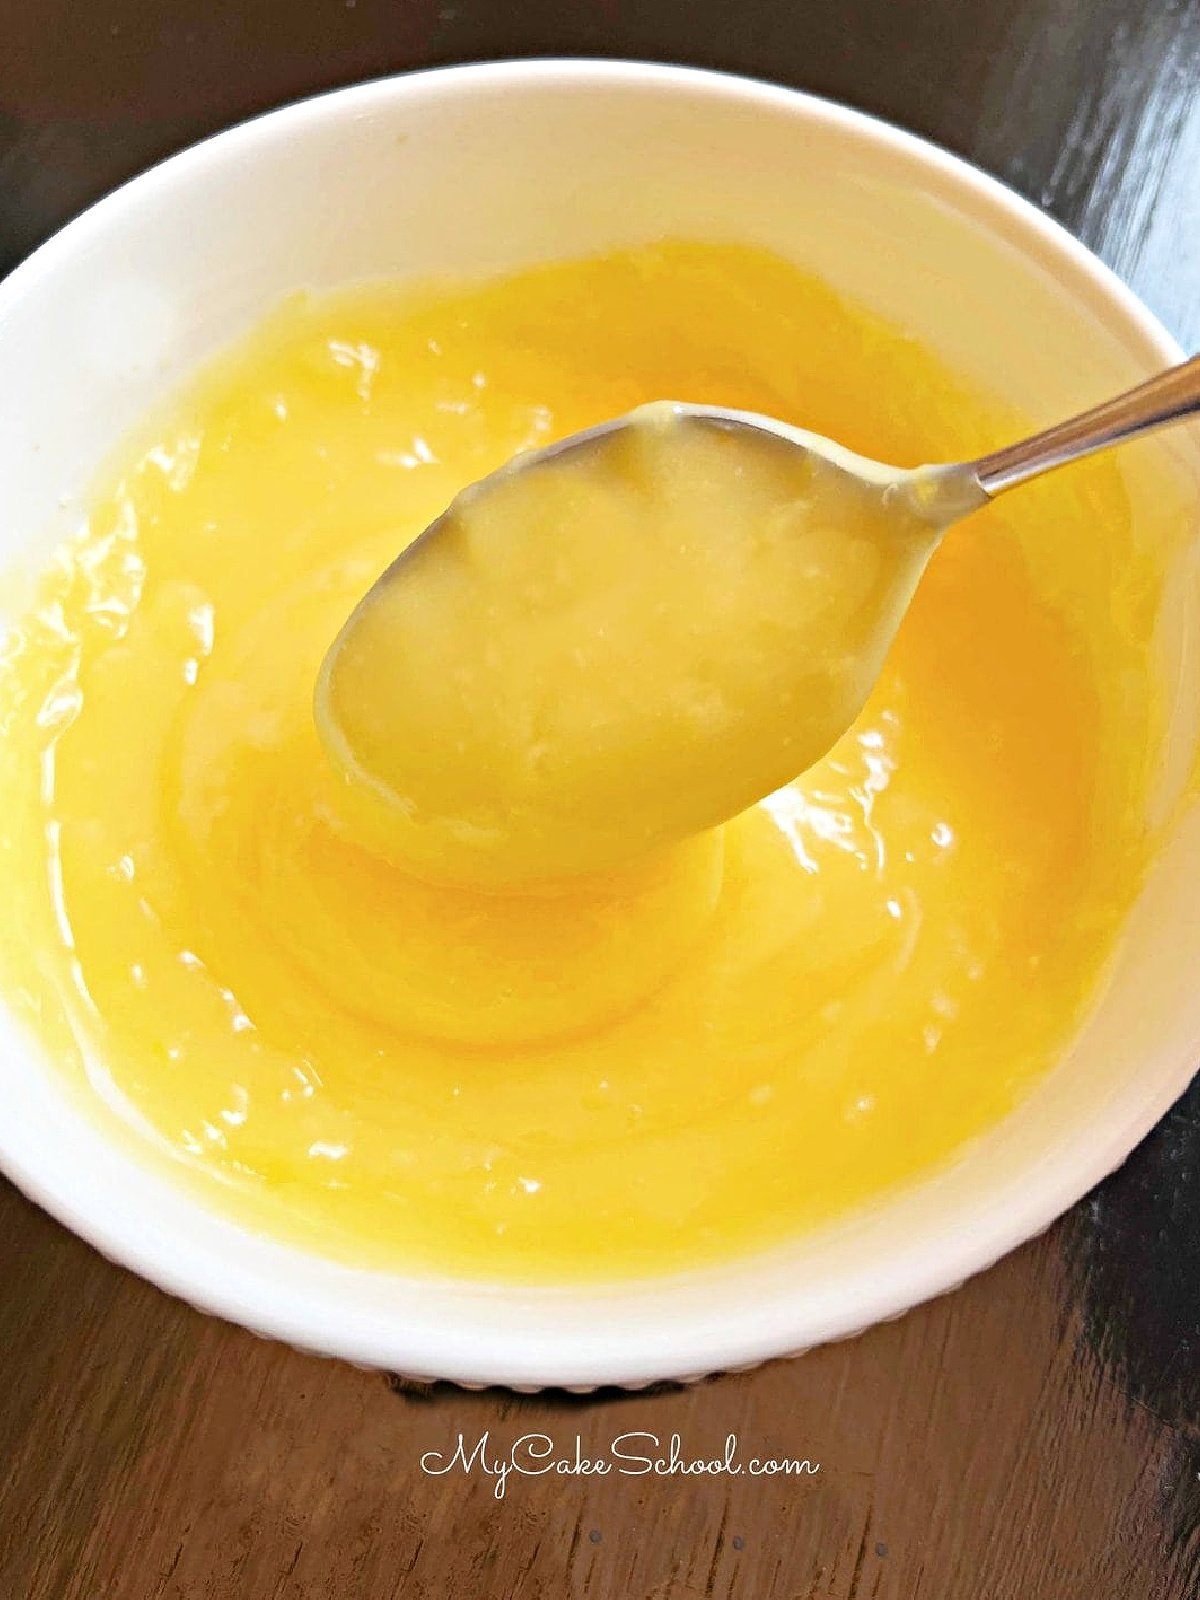 Bowl of Lemon Curd with a spoon.